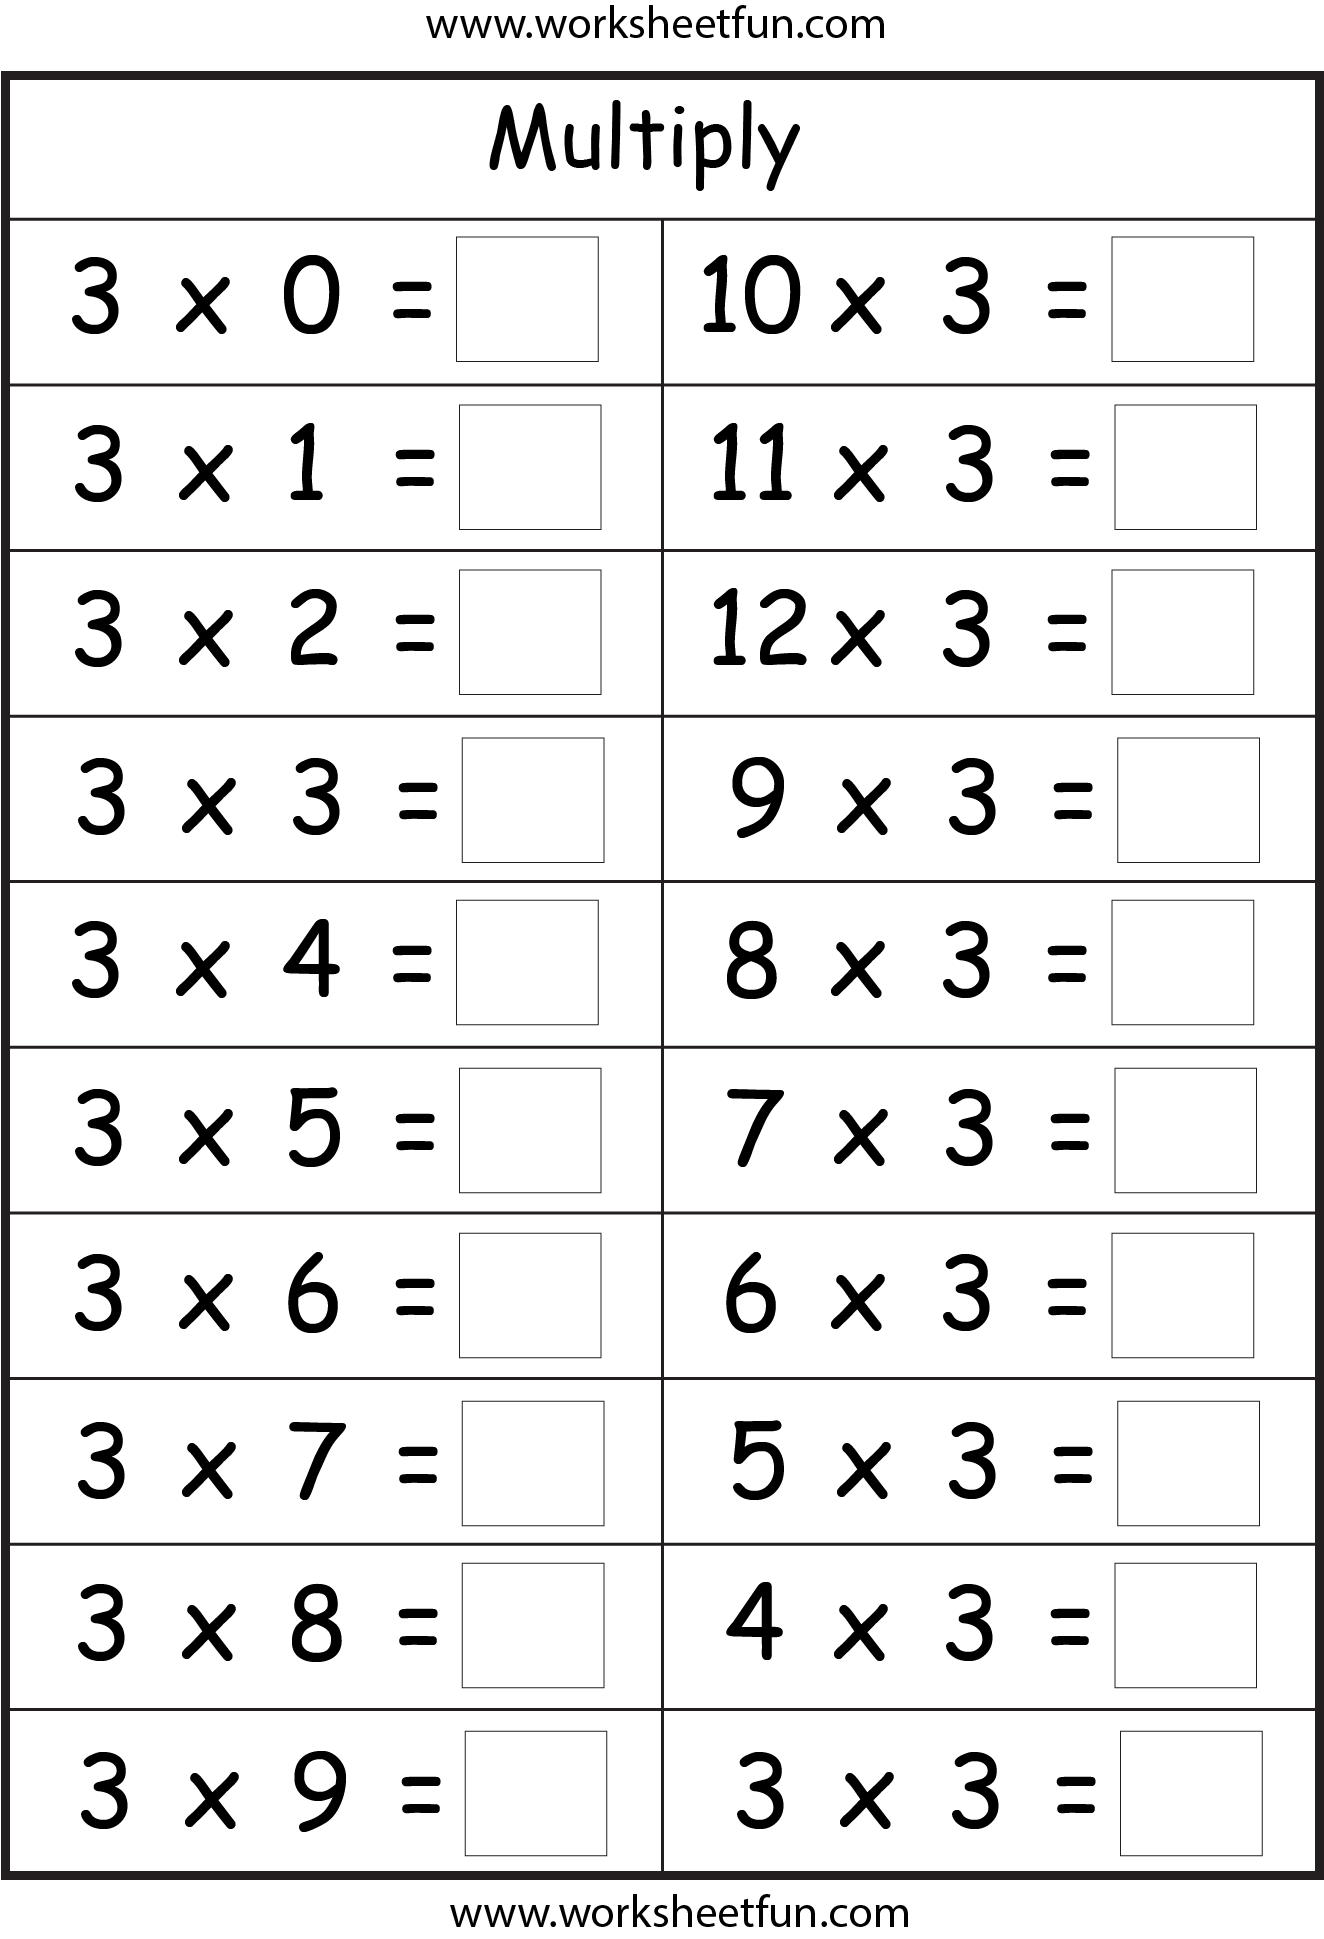 multiplication-basic-facts-2-3-4-5-6-7-8-9-times-tables-eight-worksheets-free